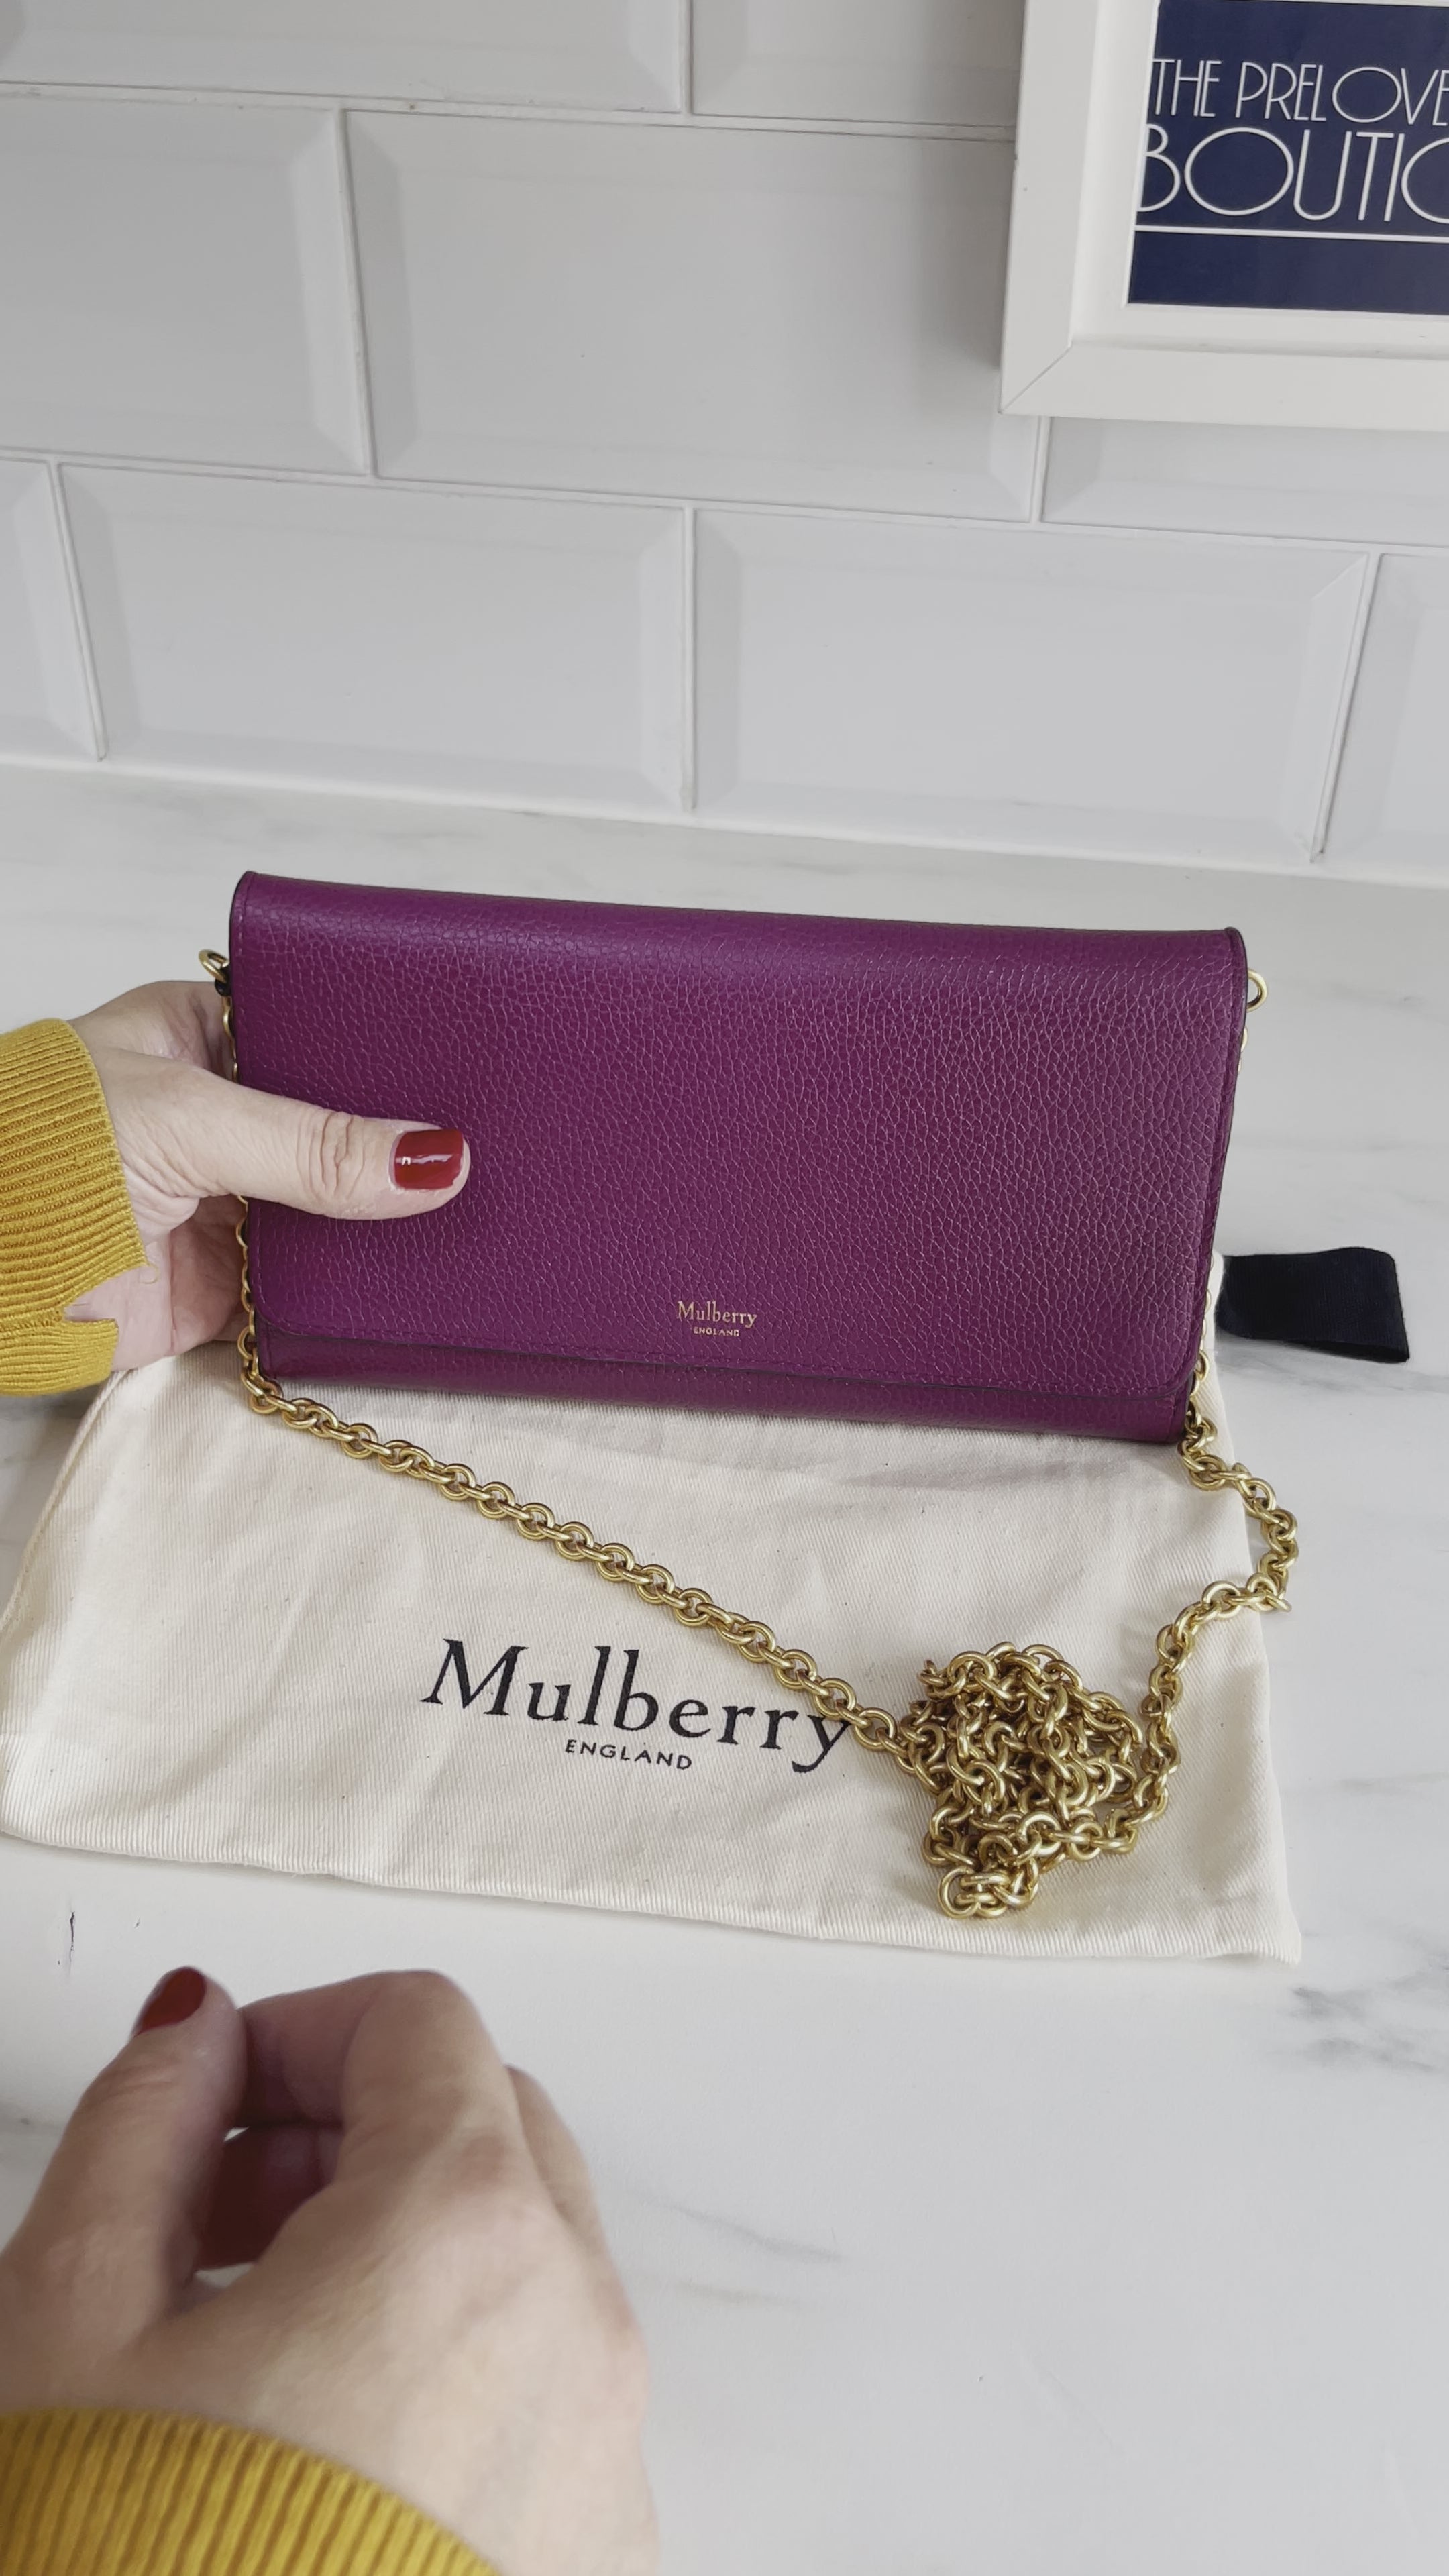 Buy Mulberry purse on sale | Marie Claire Edit